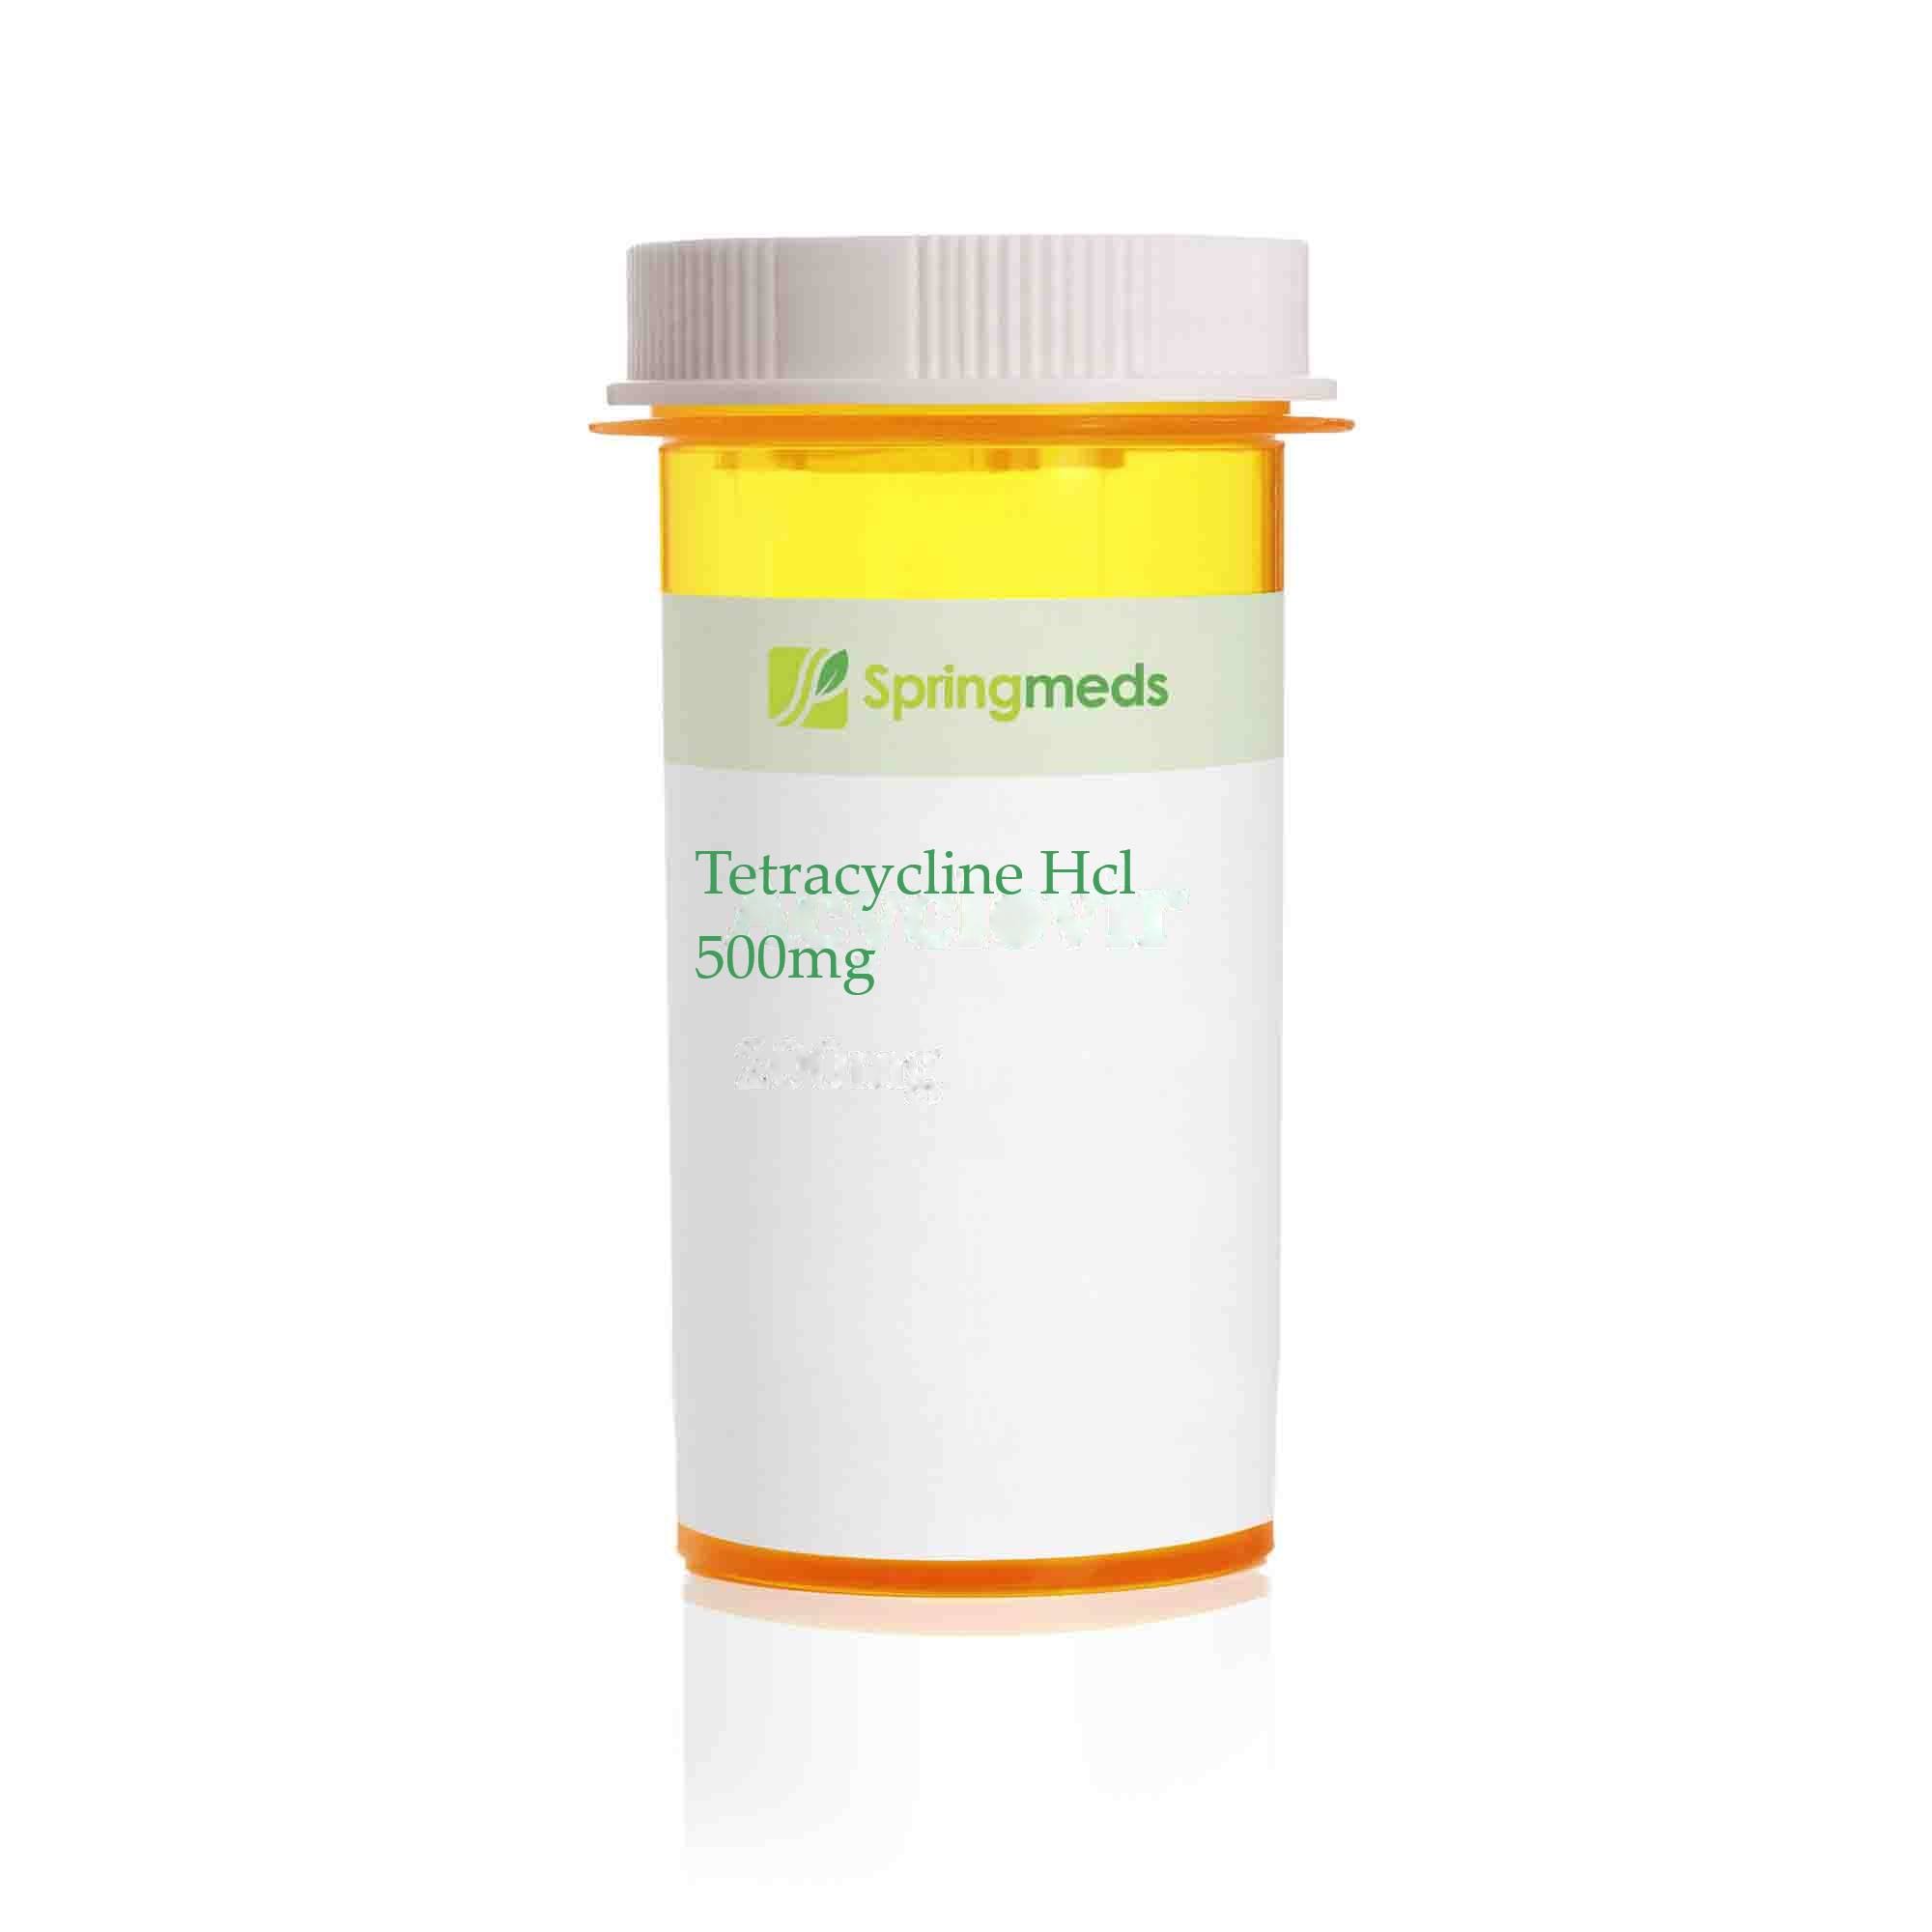 Tetracycline HCl 500mg 30.0 Capsules (generic Equivalent to Tetracyn)